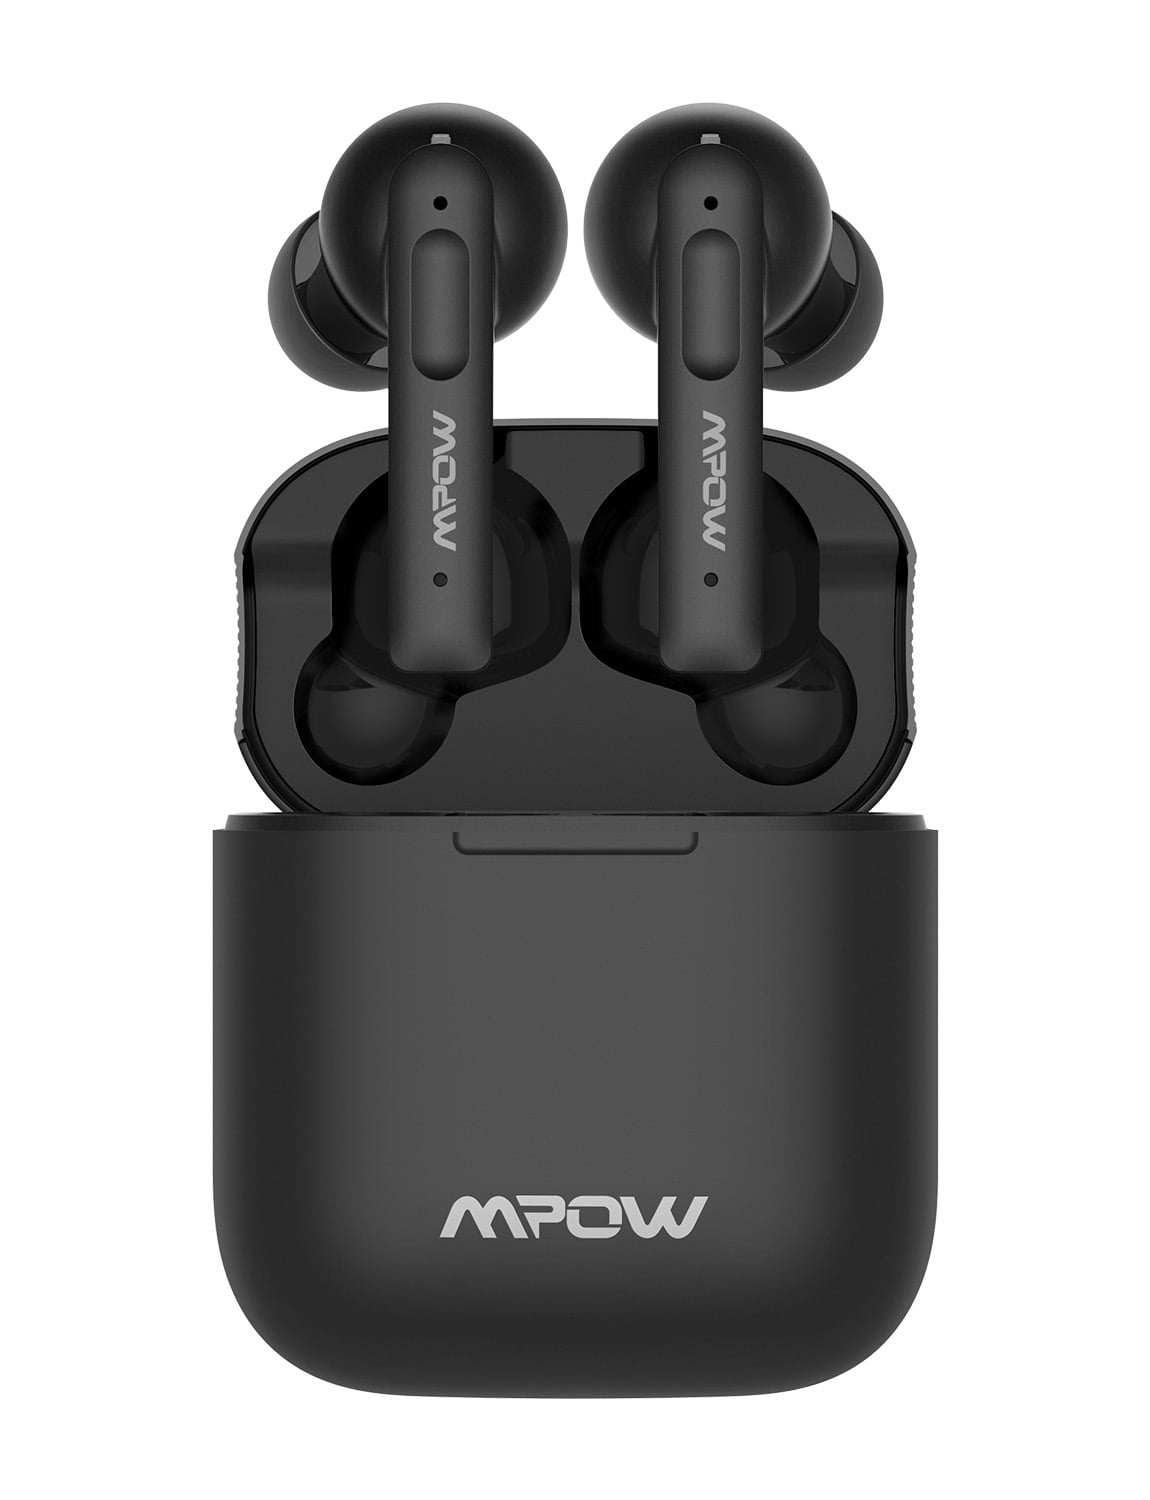 muskel Mansion ubetalt Mpow X3 ANC Wireless Earbuds, Bluetooth Earbuds Hi-Fi Stereo Headphones  with Charging Case, 4 Built-In Mic, IPX8 Waterproof in Ear Headset  Compatible for Iphone& Android, Black - Walmart.com